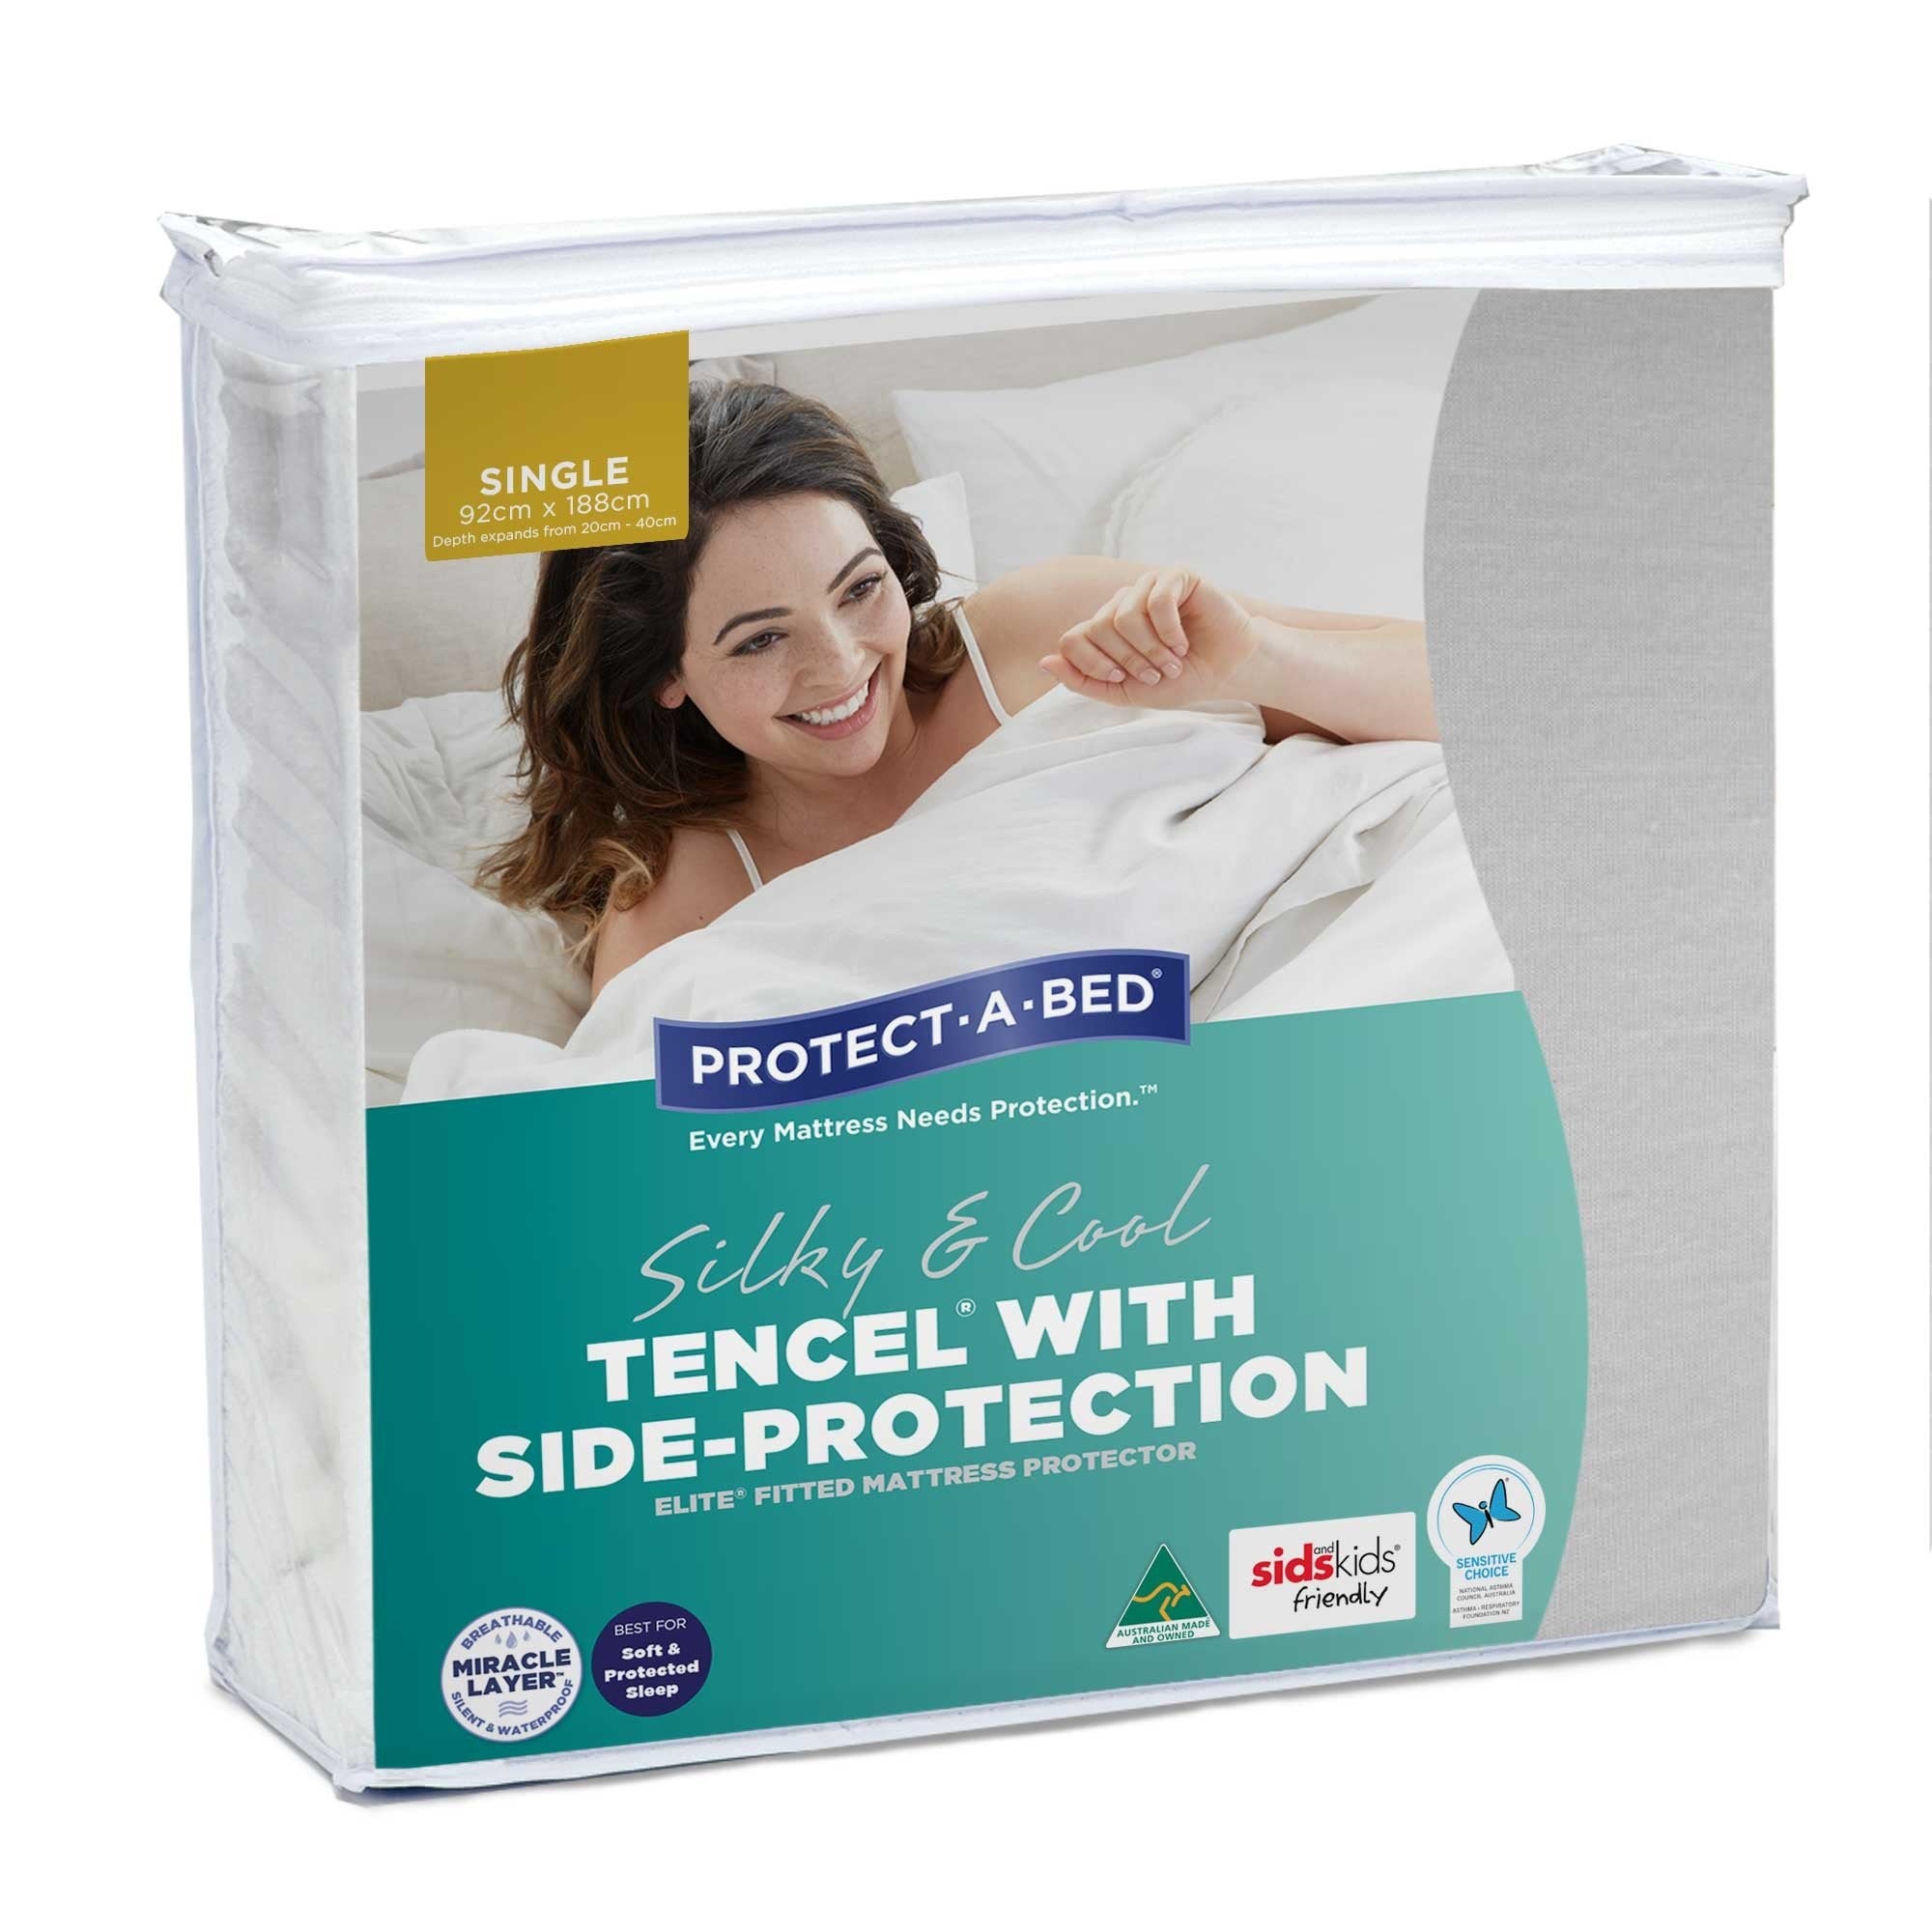 Protect-A-Bed Tencel Elite Mattress Protector - Mattress & Pillow ScienceProtection